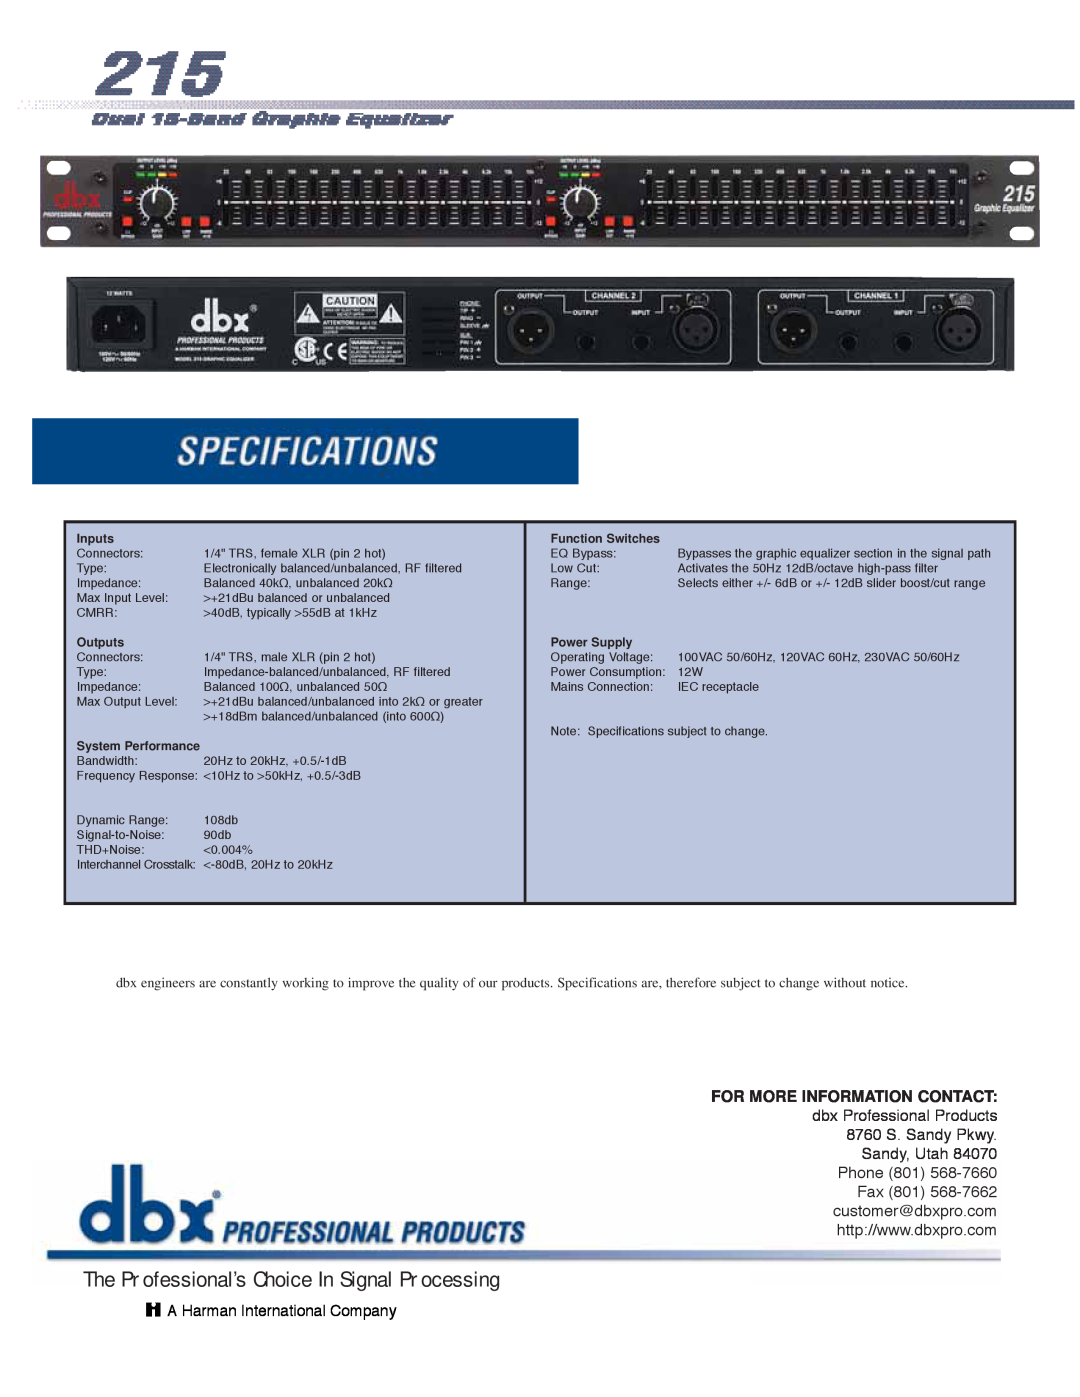 dbx Pro 215 The Professional’s Choice In Signal Processing, A Harman International Company, Inputs, Function Switches 